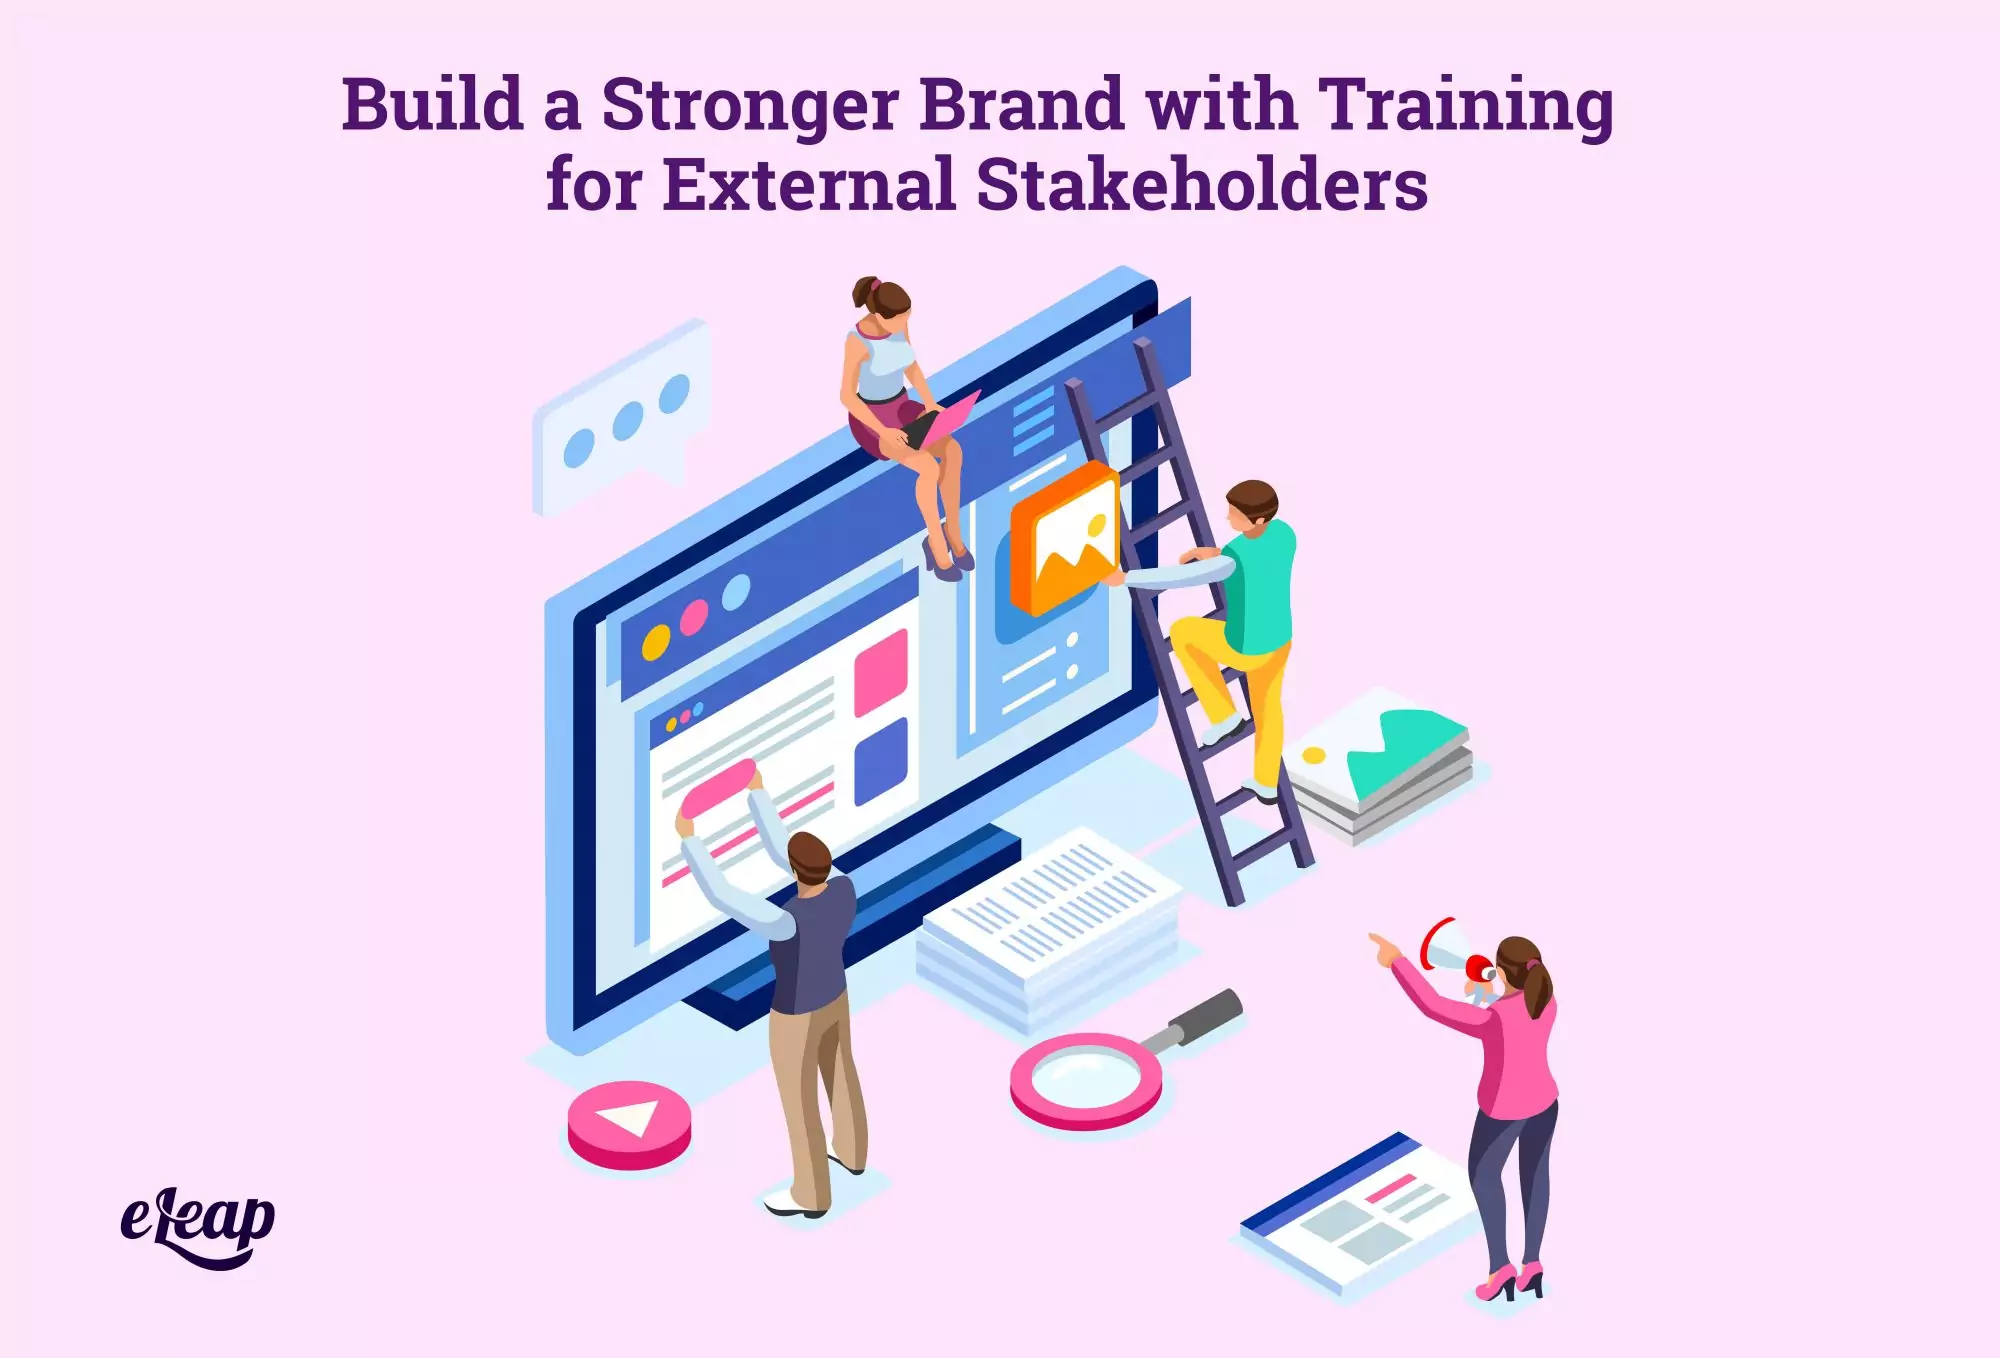 Build a Stronger Brand with Training for External Stakeholders